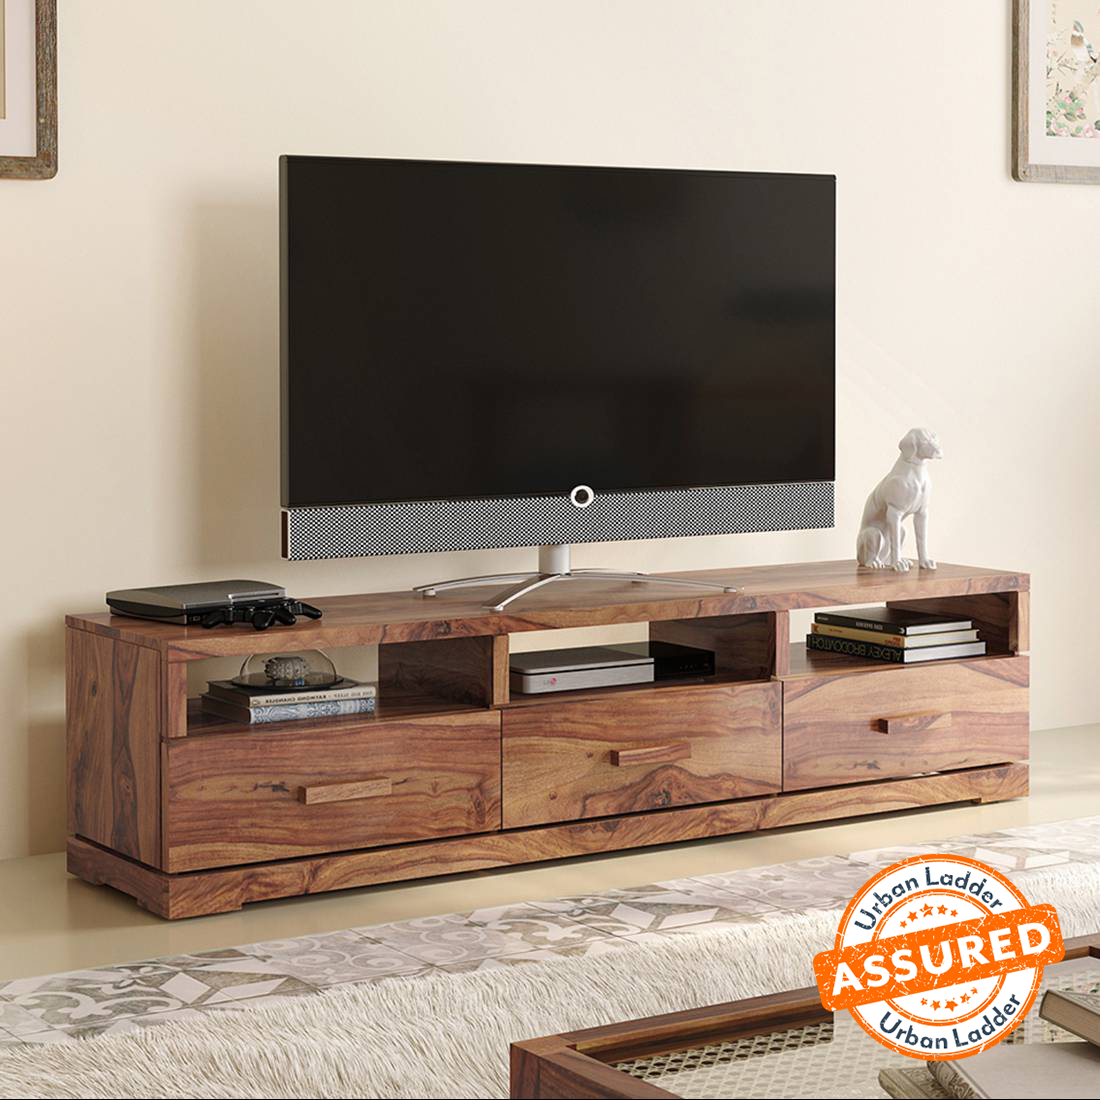 Tv Units Online And Get Up To 70